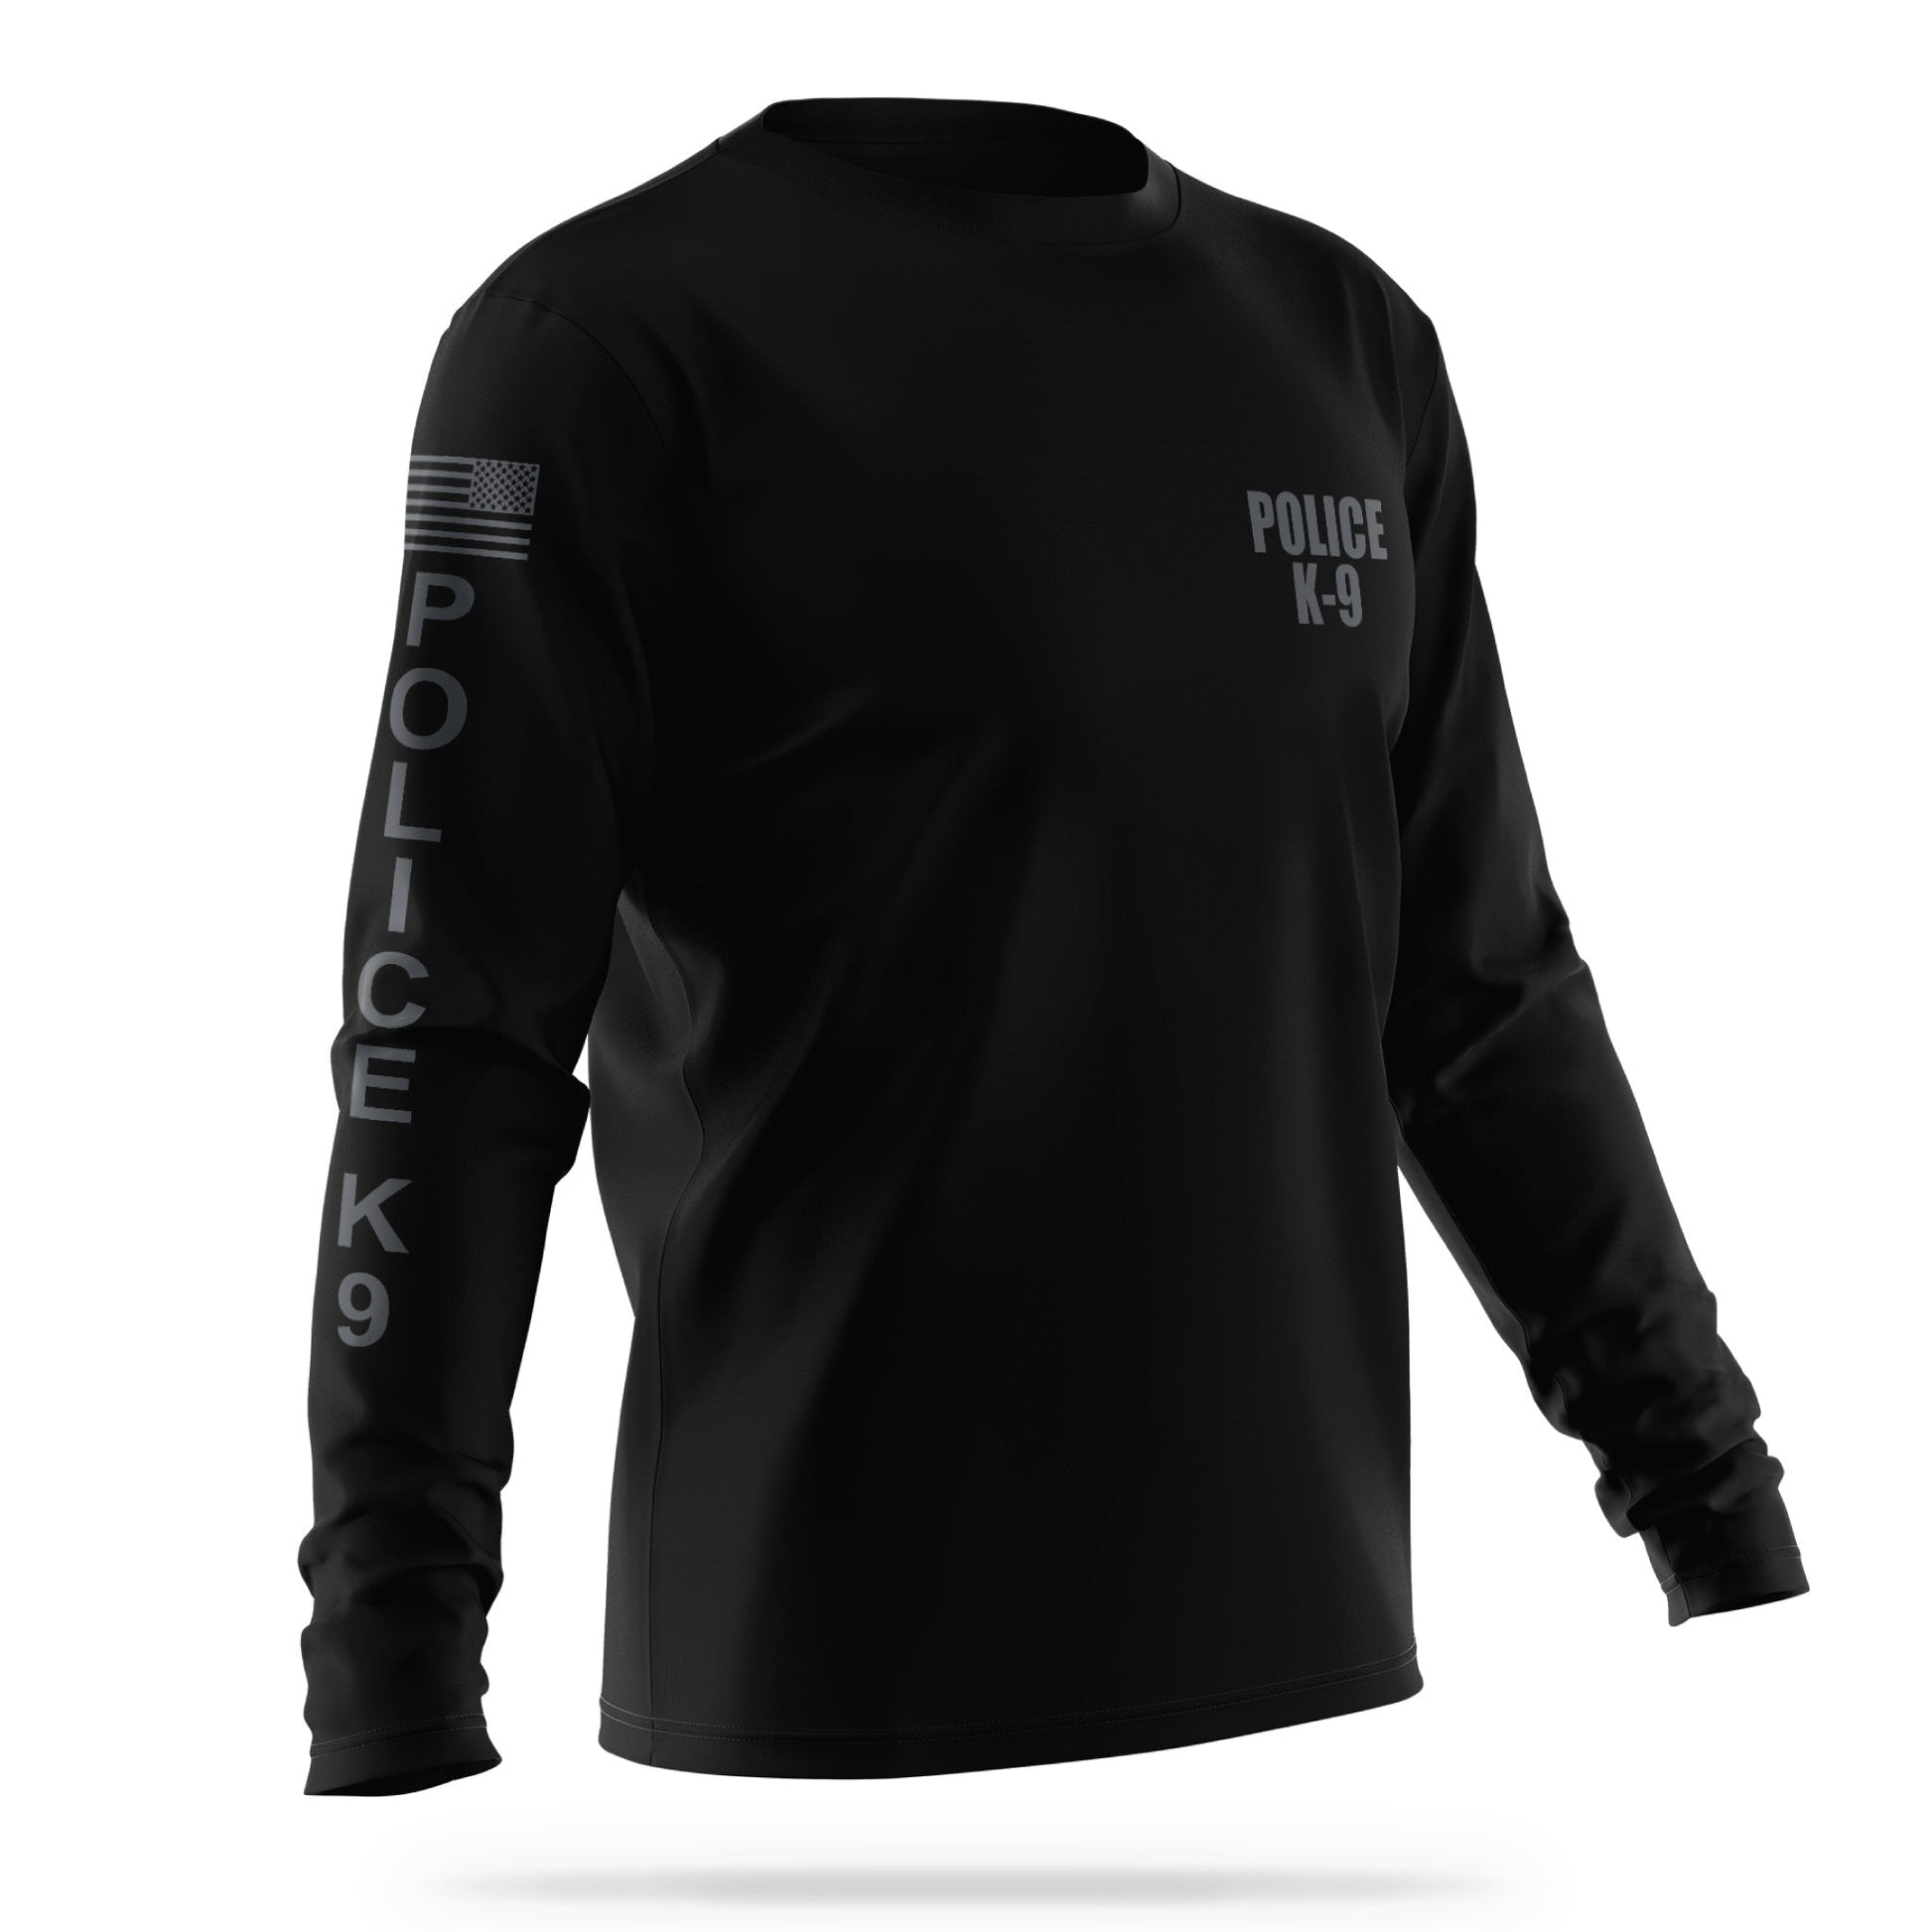 [POLICE K9] Men's Utility Long Sleeve [BLK/GRY]-13 Fifty Apparel